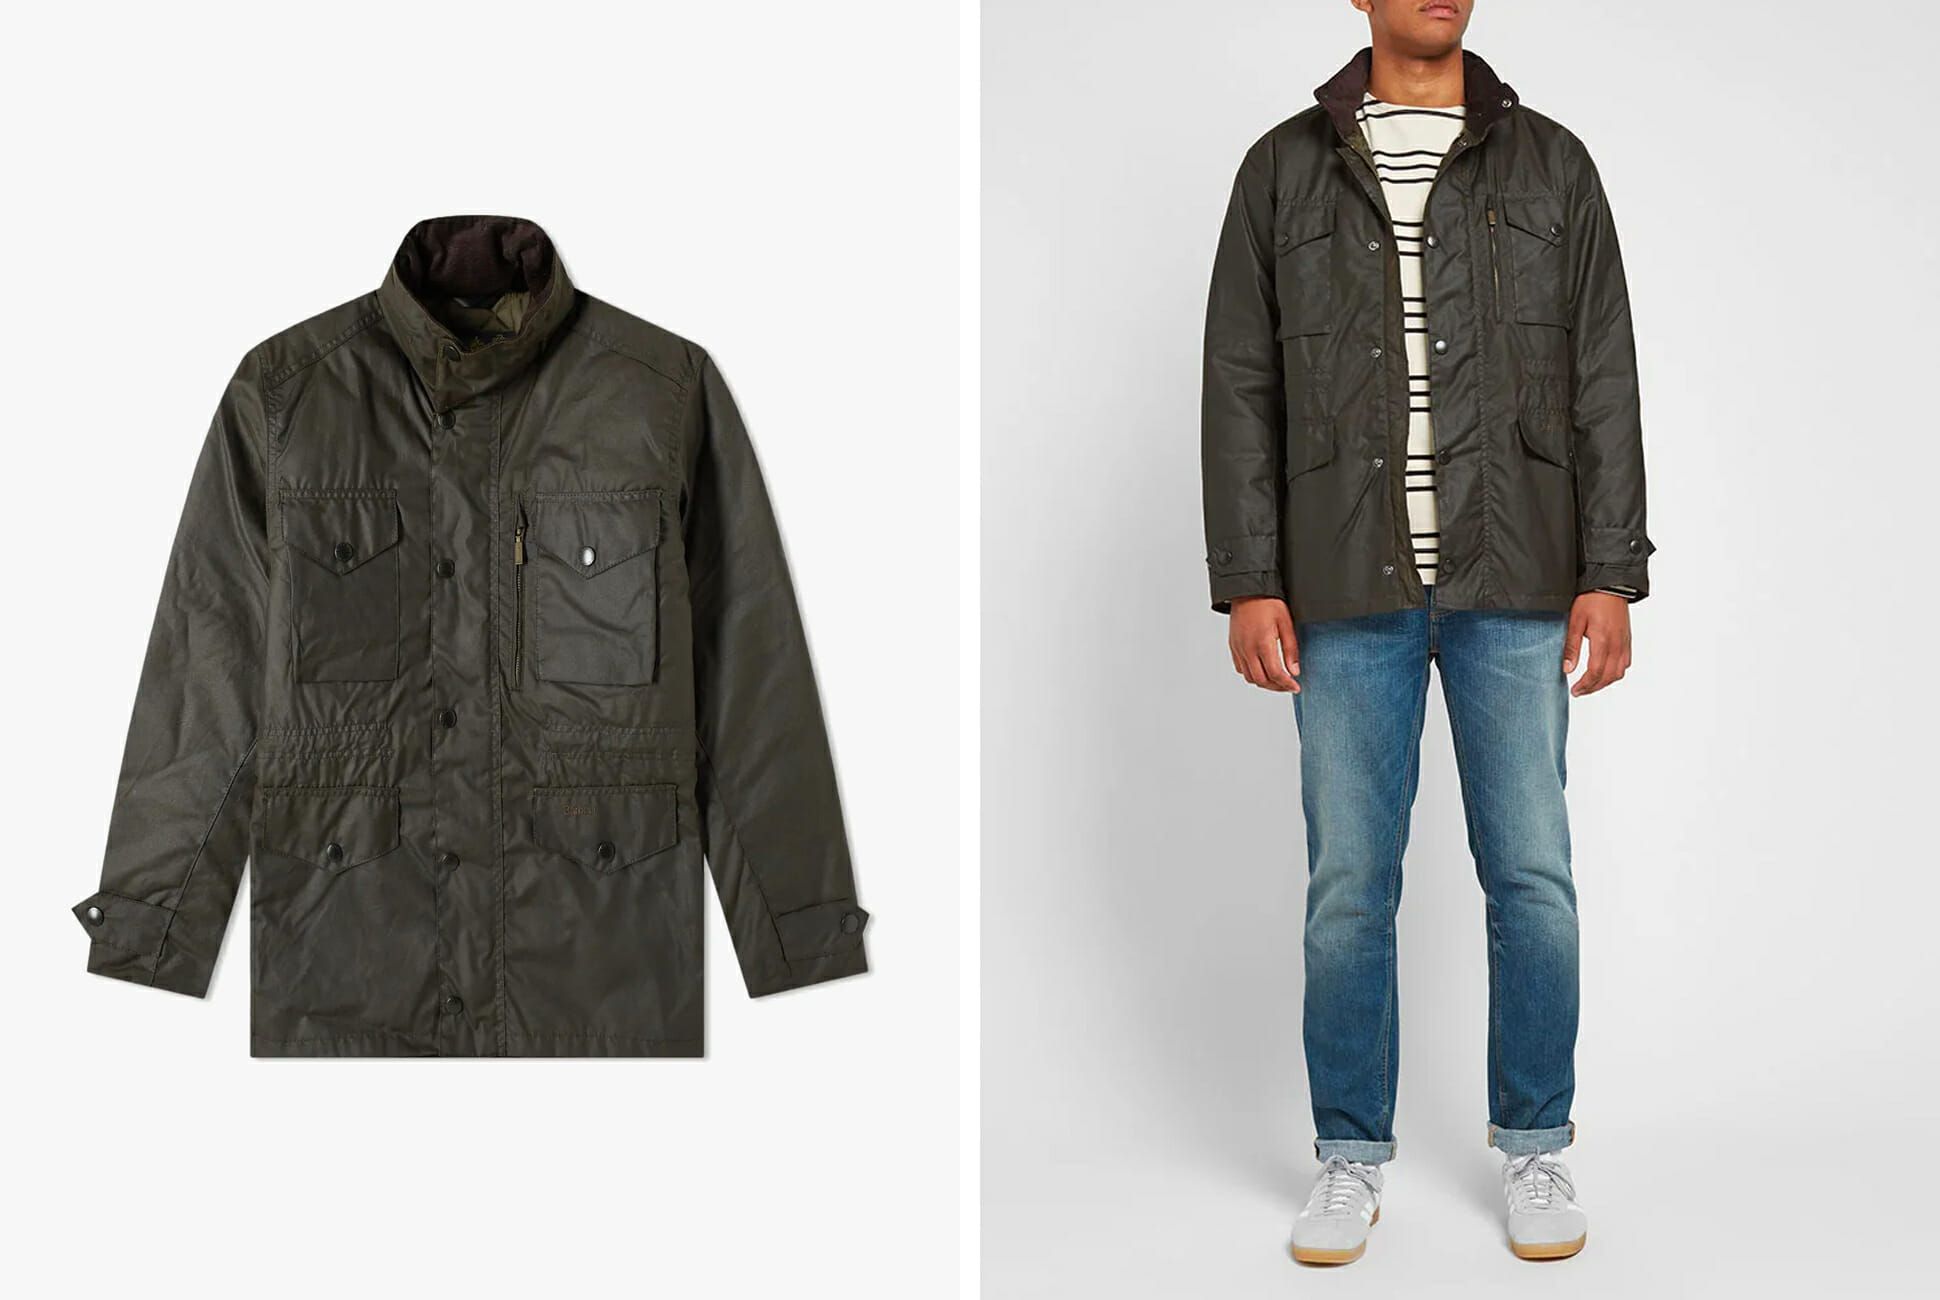 iconic barbour jacket